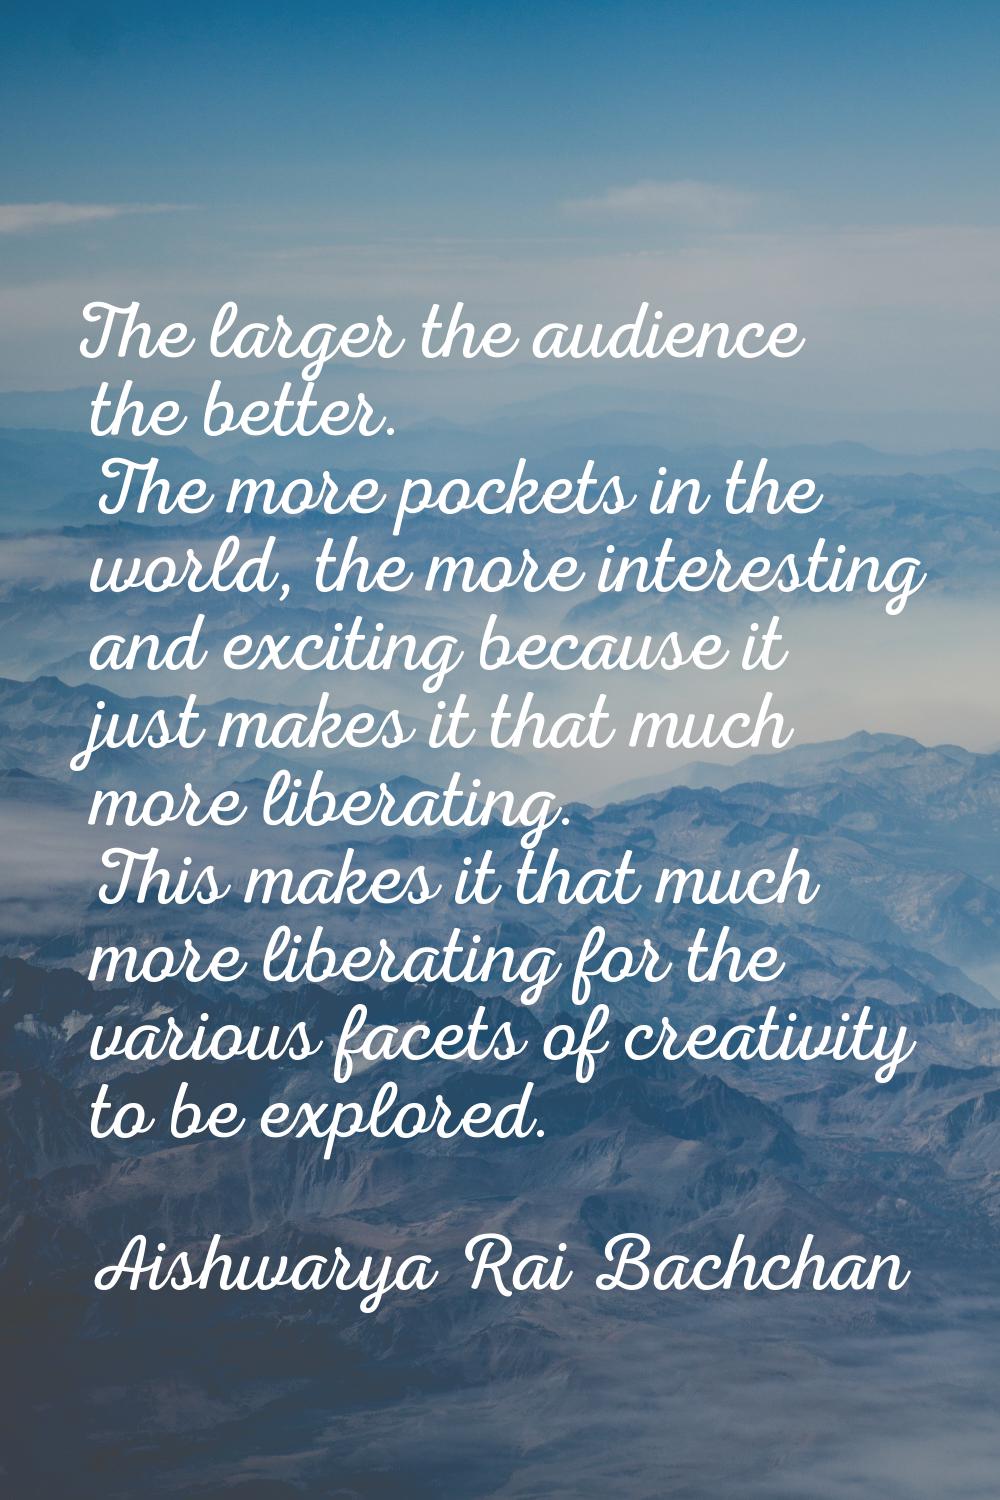 The larger the audience the better. The more pockets in the world, the more interesting and excitin